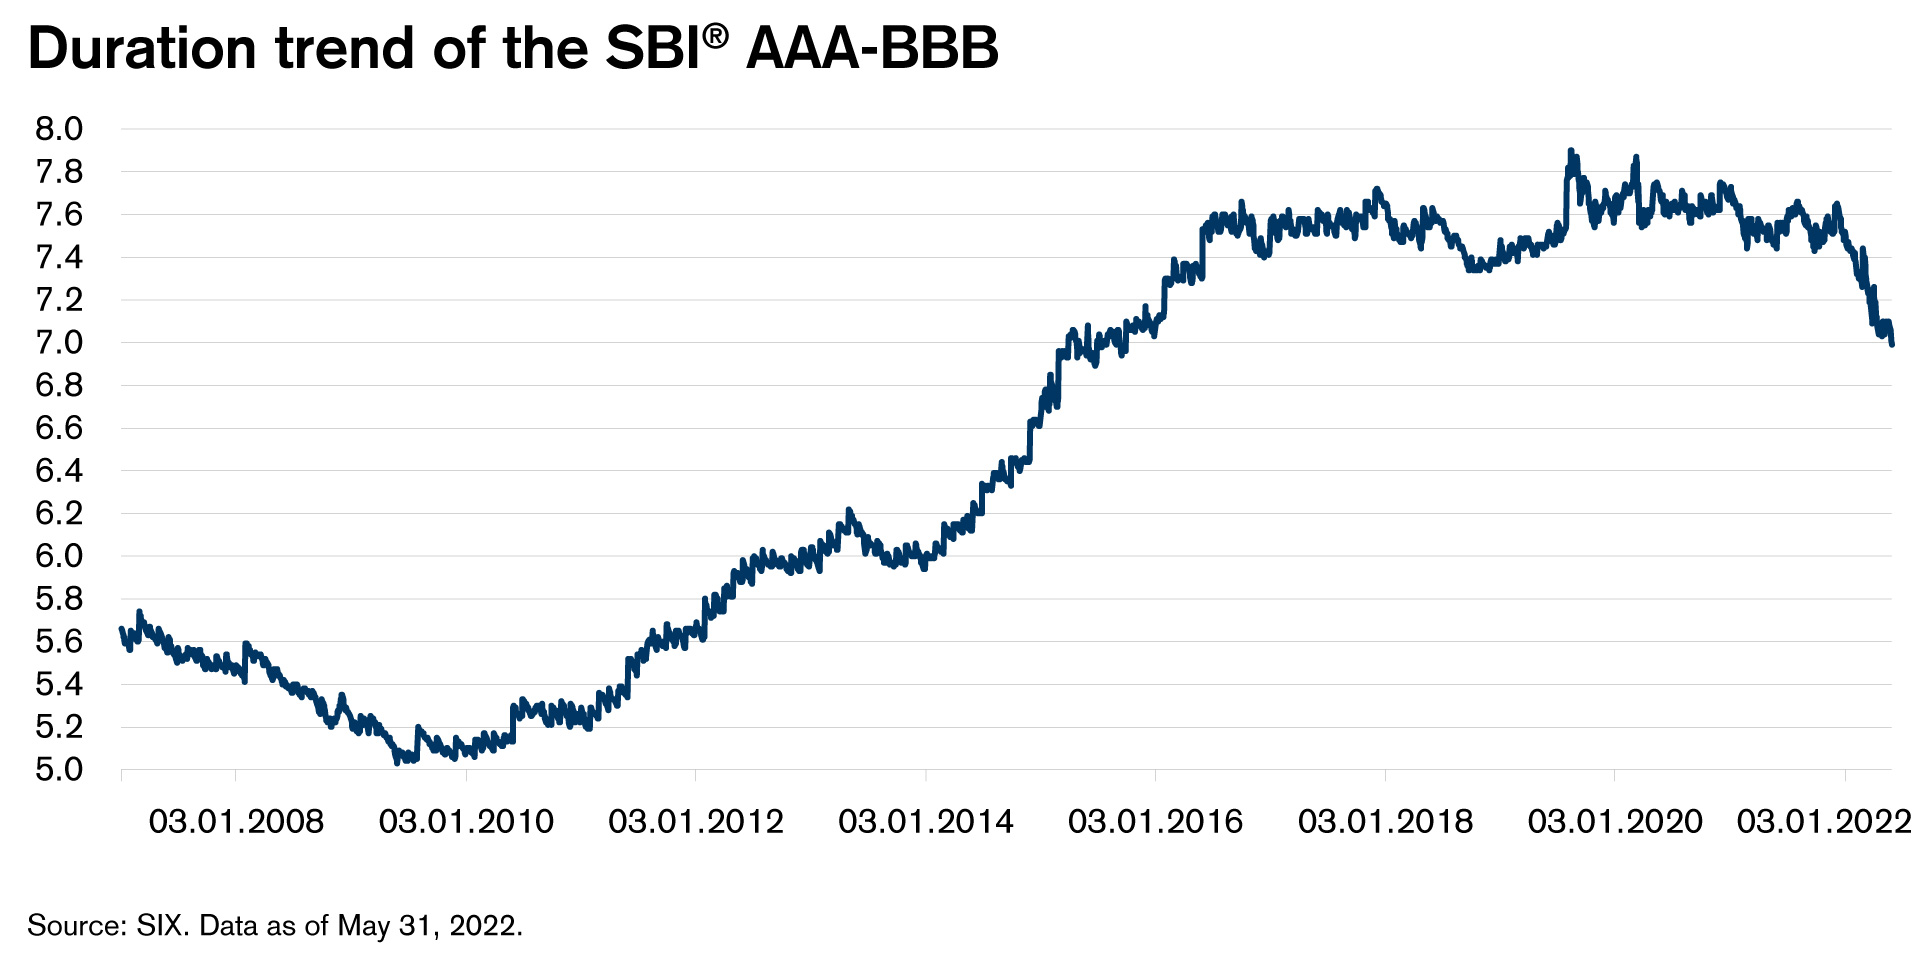 Figure 1: Duration trend of the SBI® AAA-BBB